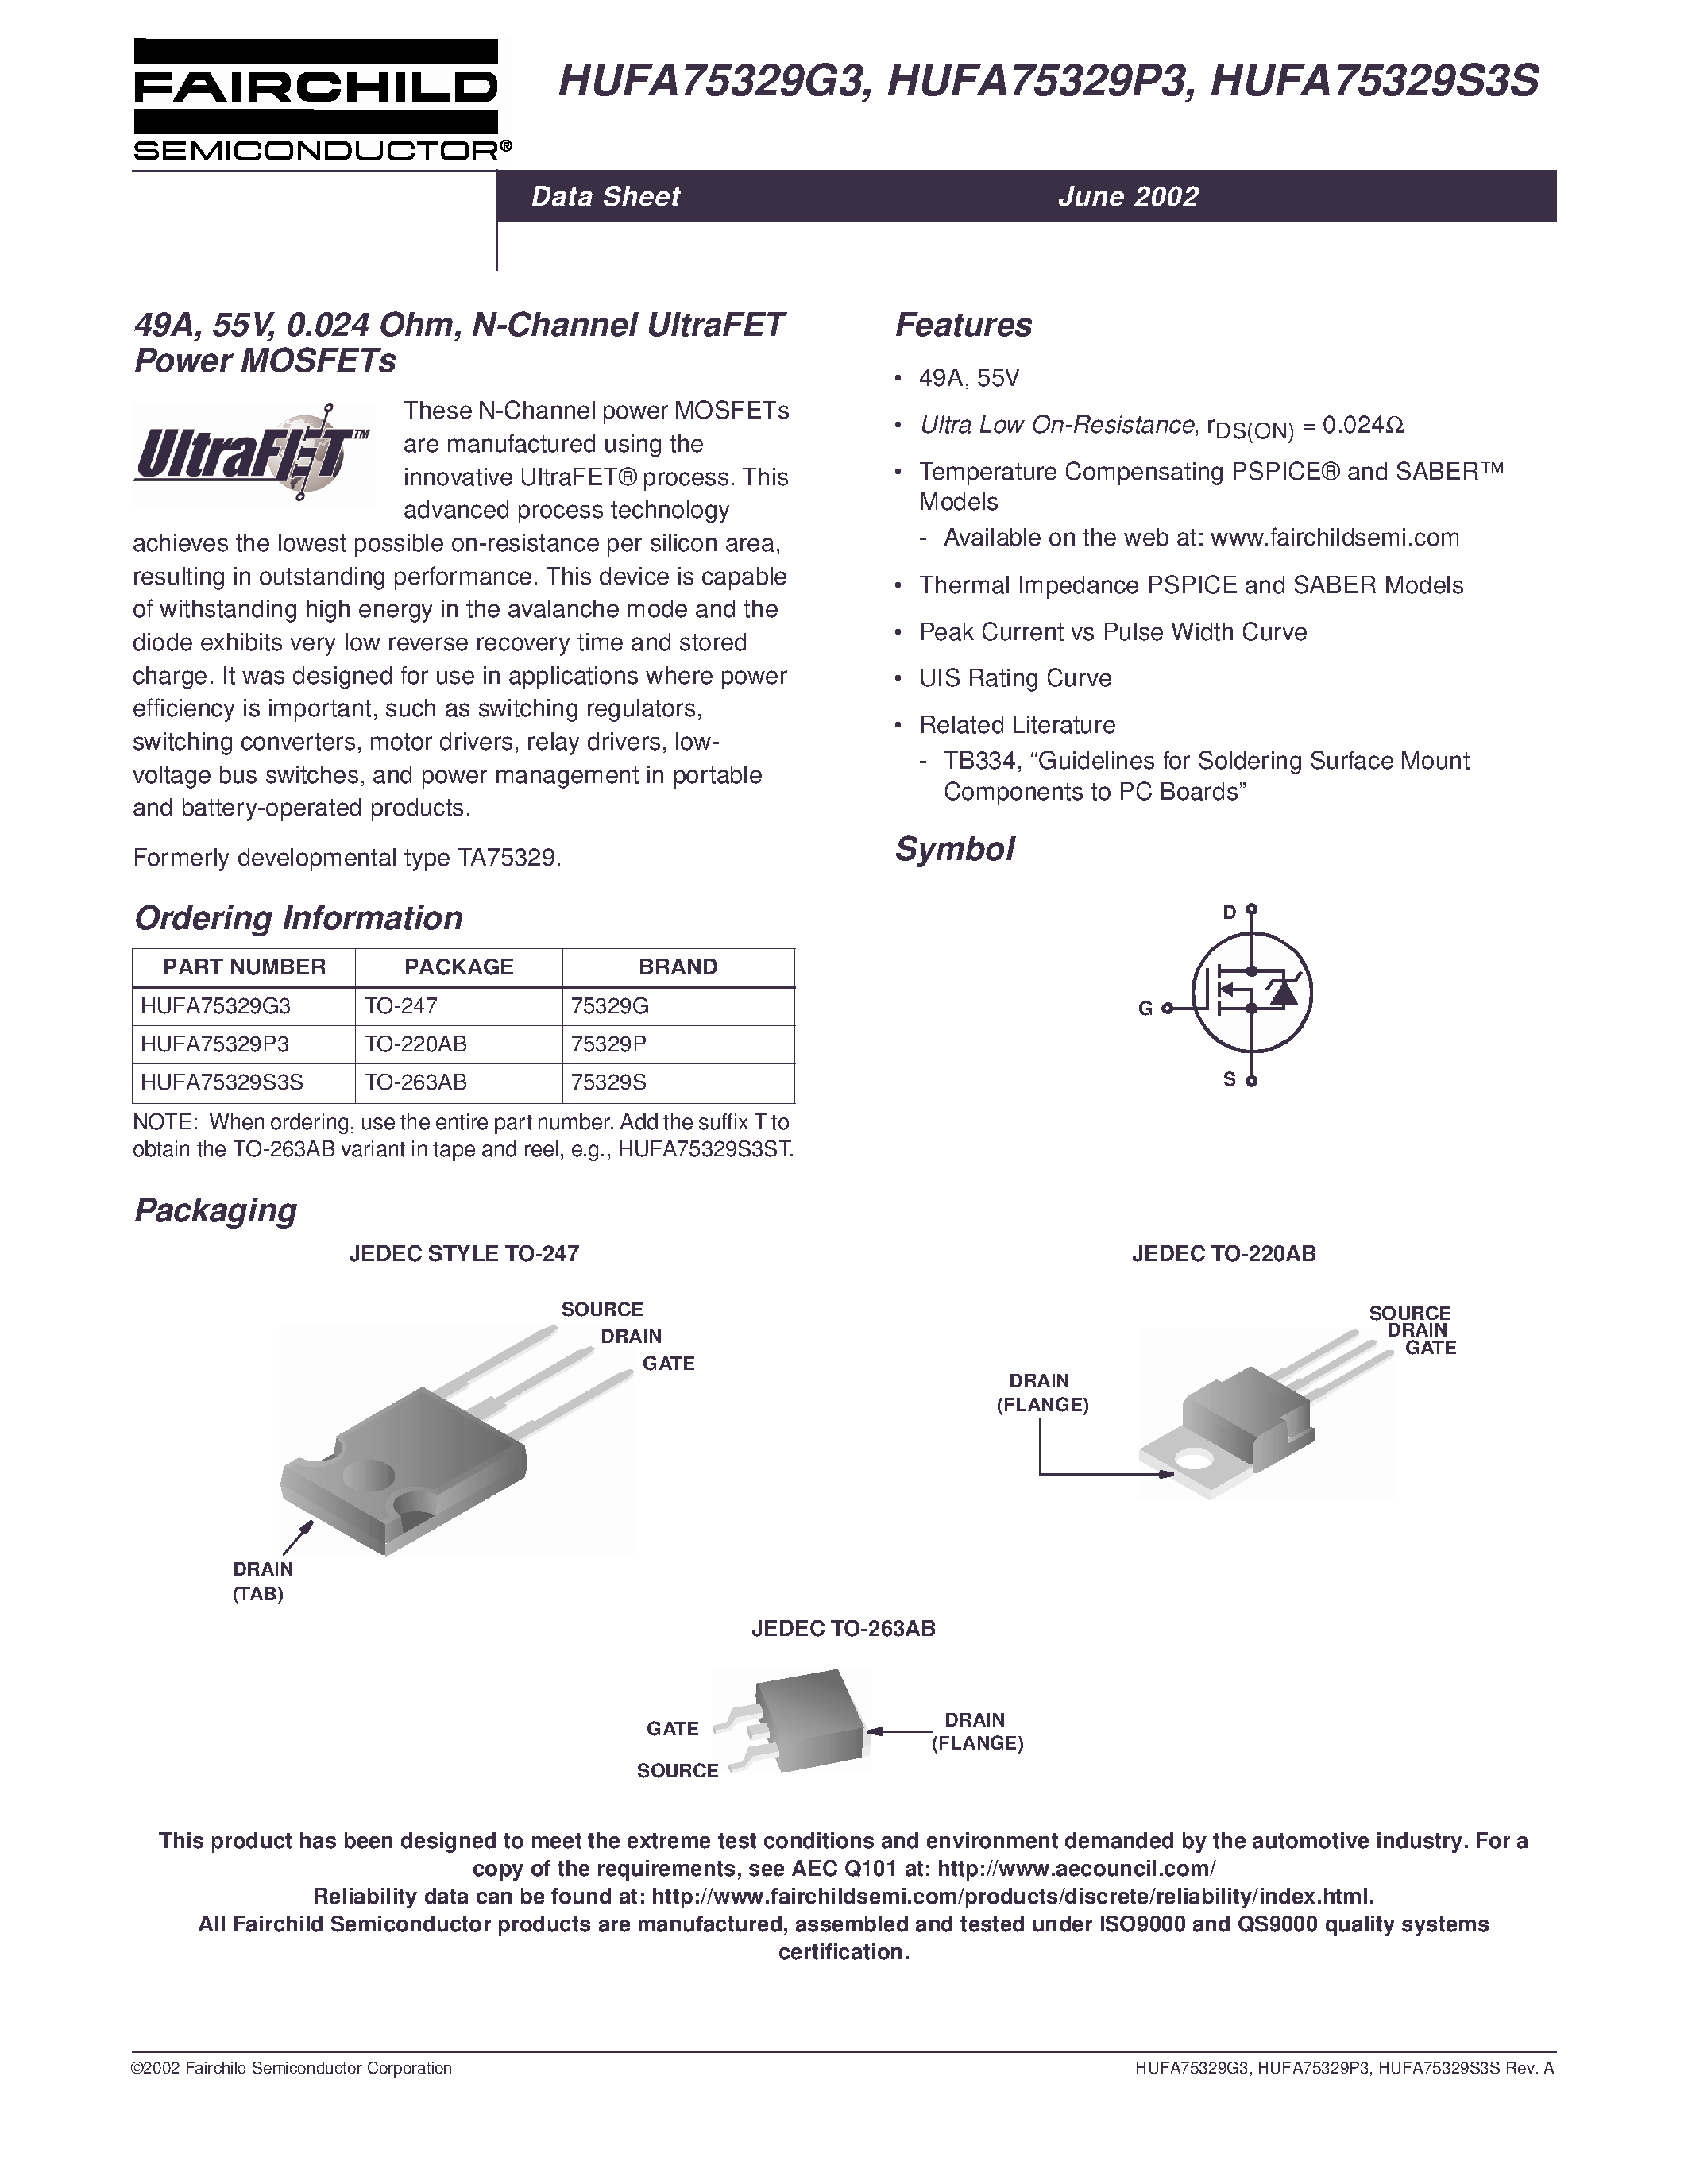 Даташит HUFA75333P3 - 66A/ 55V/ 0.016 Ohm. N-Channel UltraFET Power MOSFETs страница 1